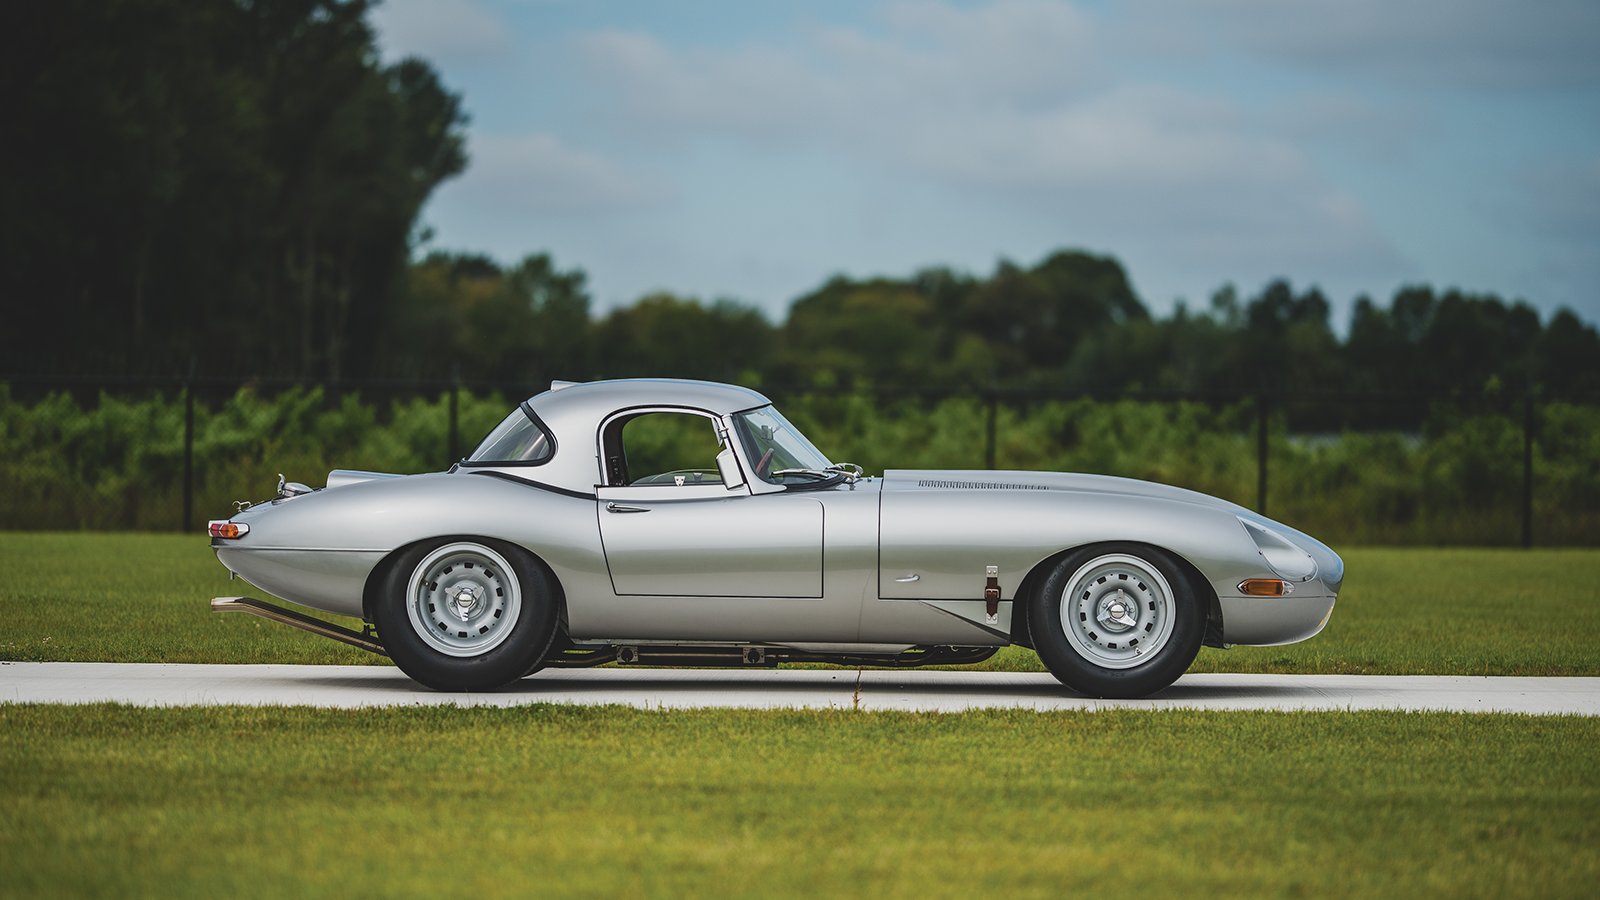 Magnificent 230-car collection up for auction